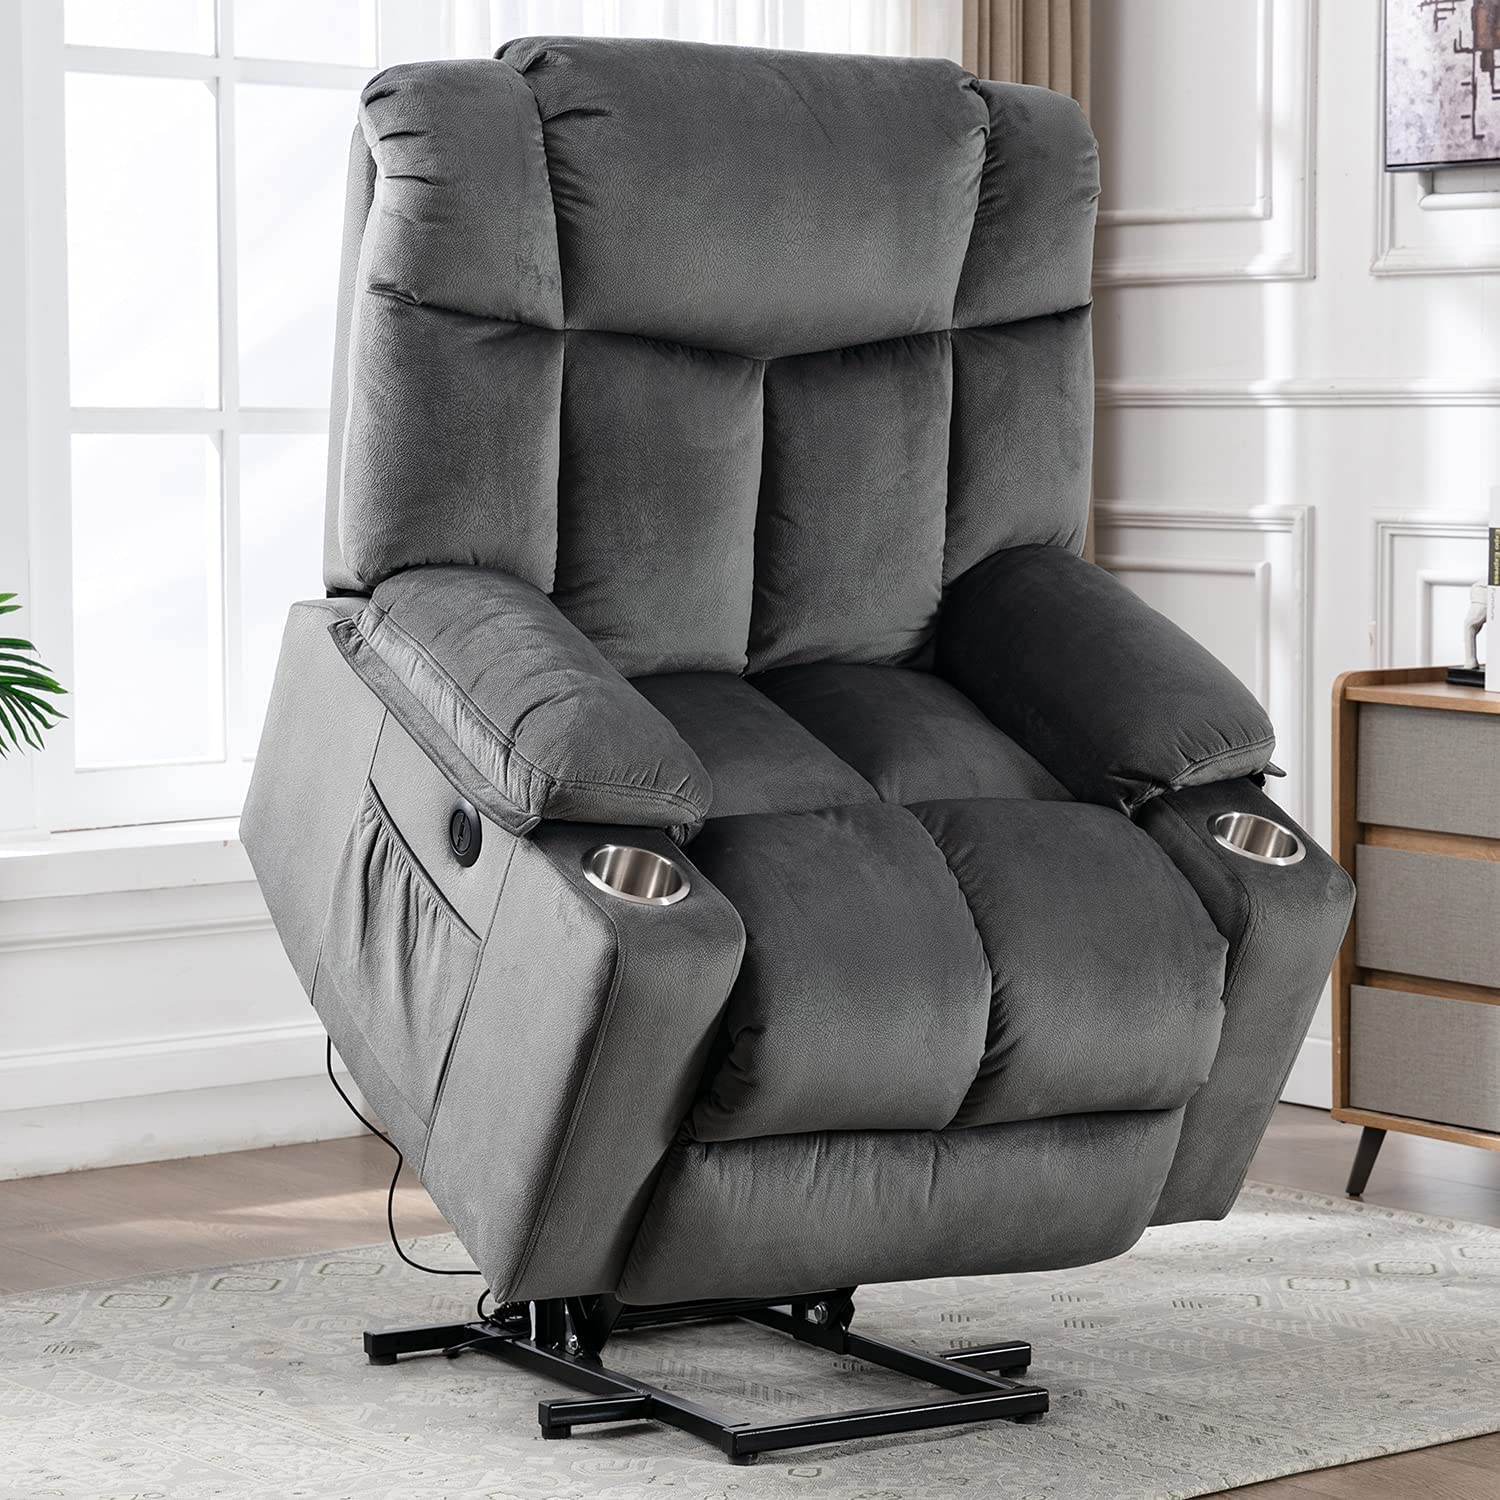 CANMOV Power Lift Recliner Chair (Grey)